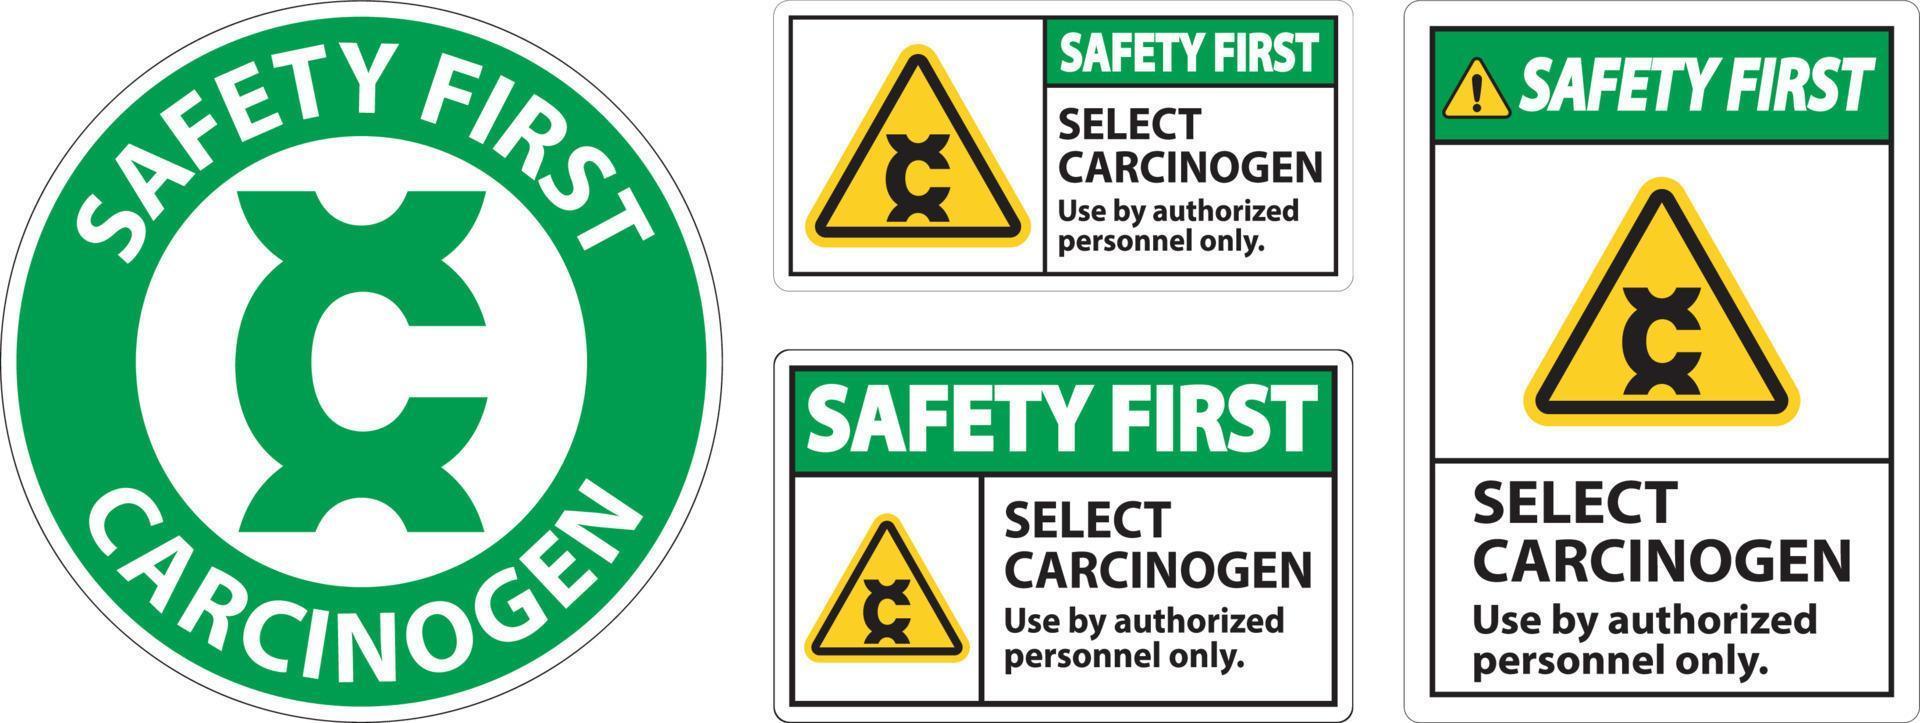 Safety First Select Carcinogen Label On White Background vector